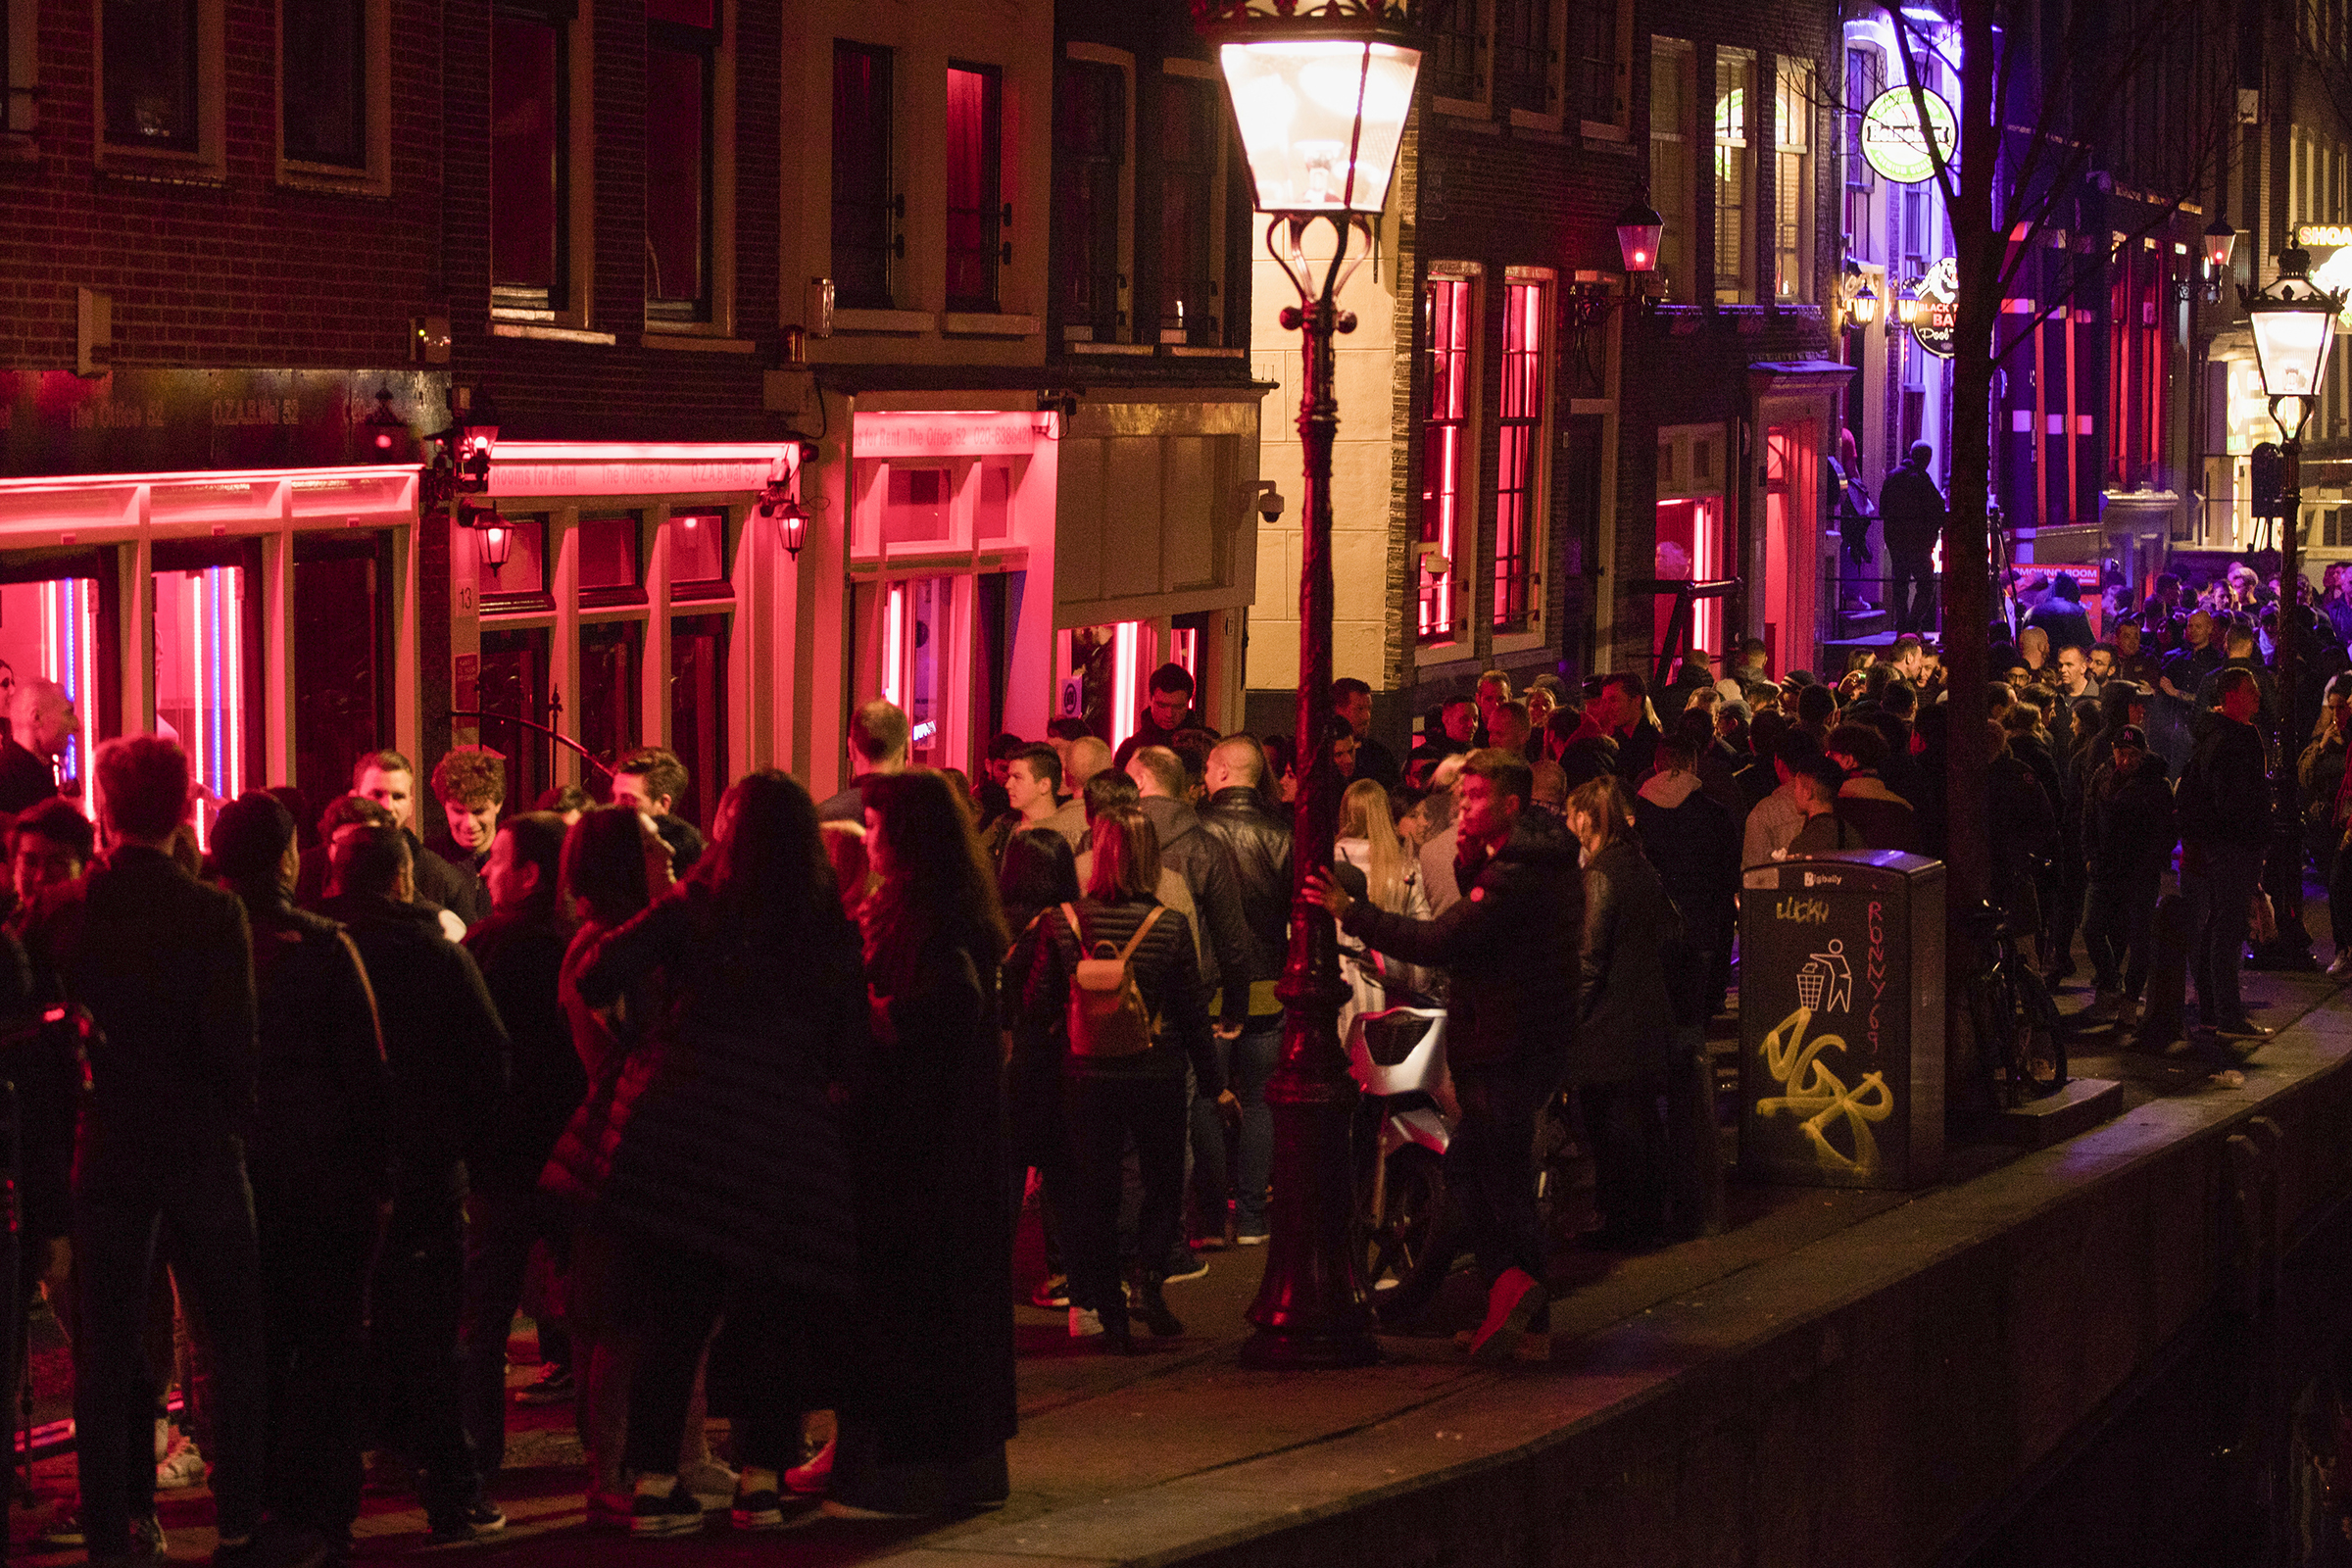 Tourists bathing in a red glow emanating from peep show windows are packed shoulder to shoulder as they shuffle through the alleys in Amsterdam's red light district, Netherlands on March 29, 2019. (Peter Dejong—AP)